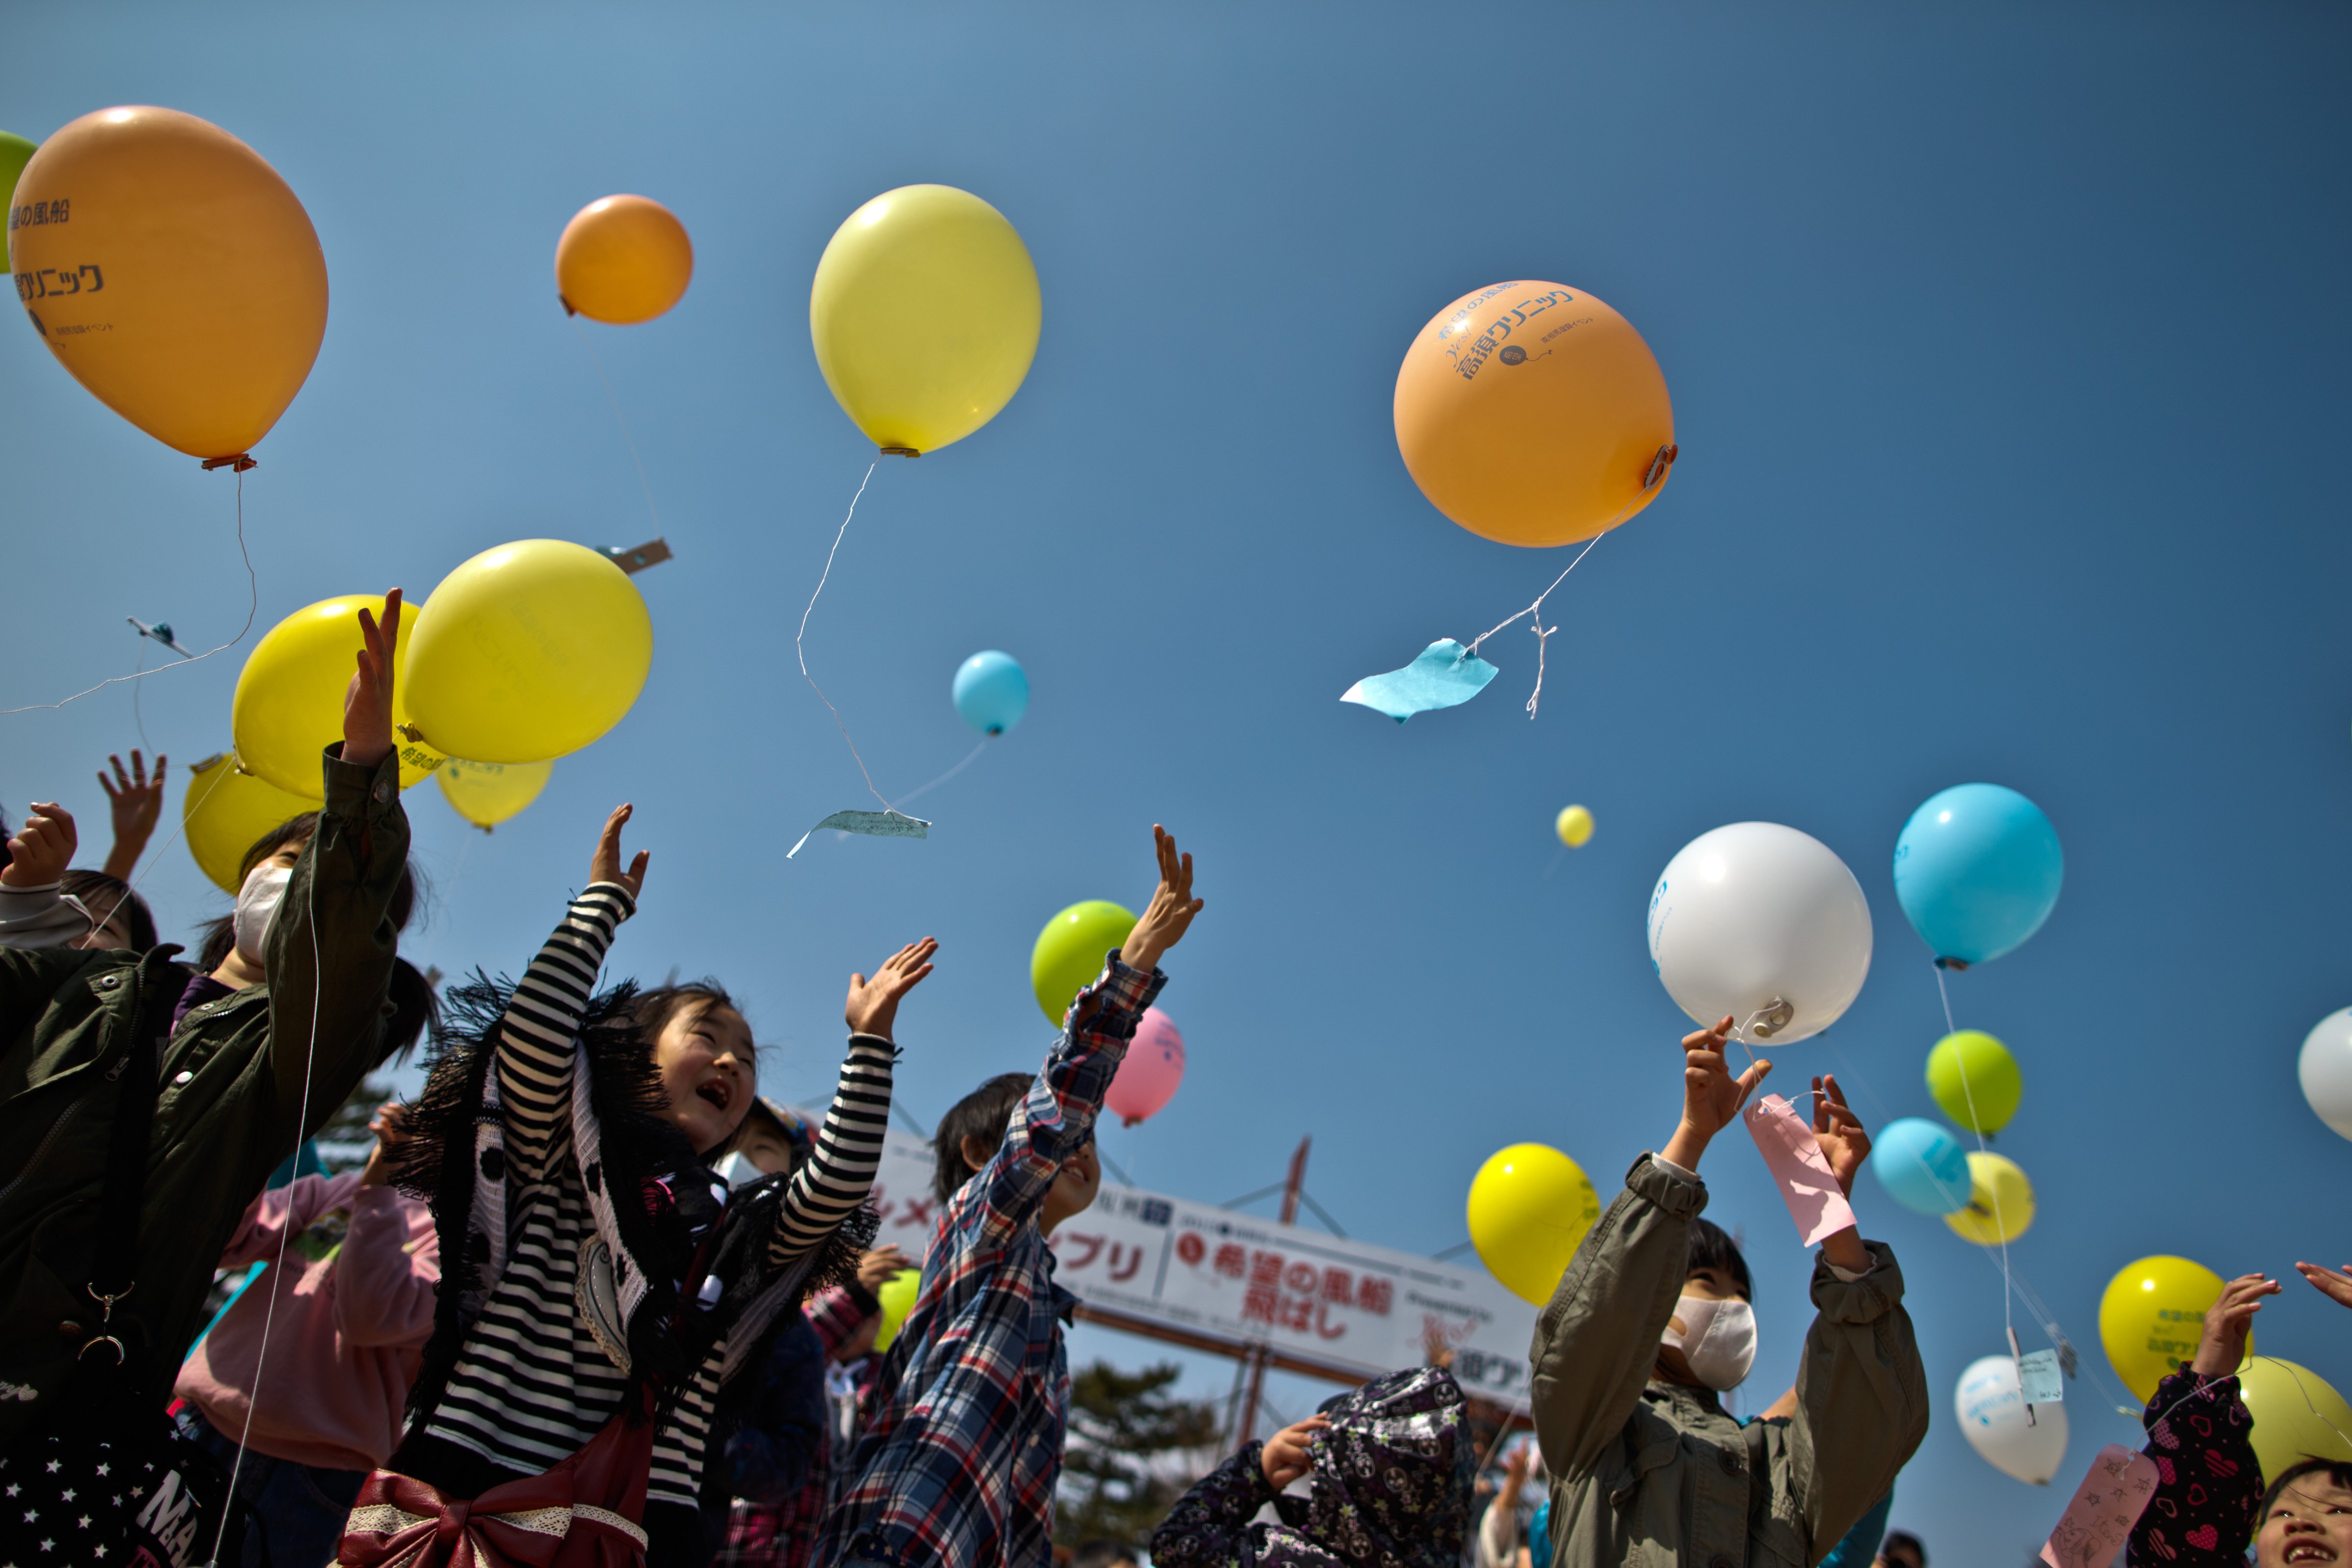 MINAMISOMA, JAPAN - MARCH 10:  Children float balloons and pay their respects to victims during the second anniversary commemoration of the earthquake and tsunami on March 10, 2013 in Minamisoma, Japan. Japan on March 11 will commemorate the second anniversary of the magnitude 9.0 earthquake and following tsunami, that claimed more than 18,000 lives.  (Photo by Athit Perawongmetha/Getty Images) (Athit Perawongmetha&mdash;Getty Images)